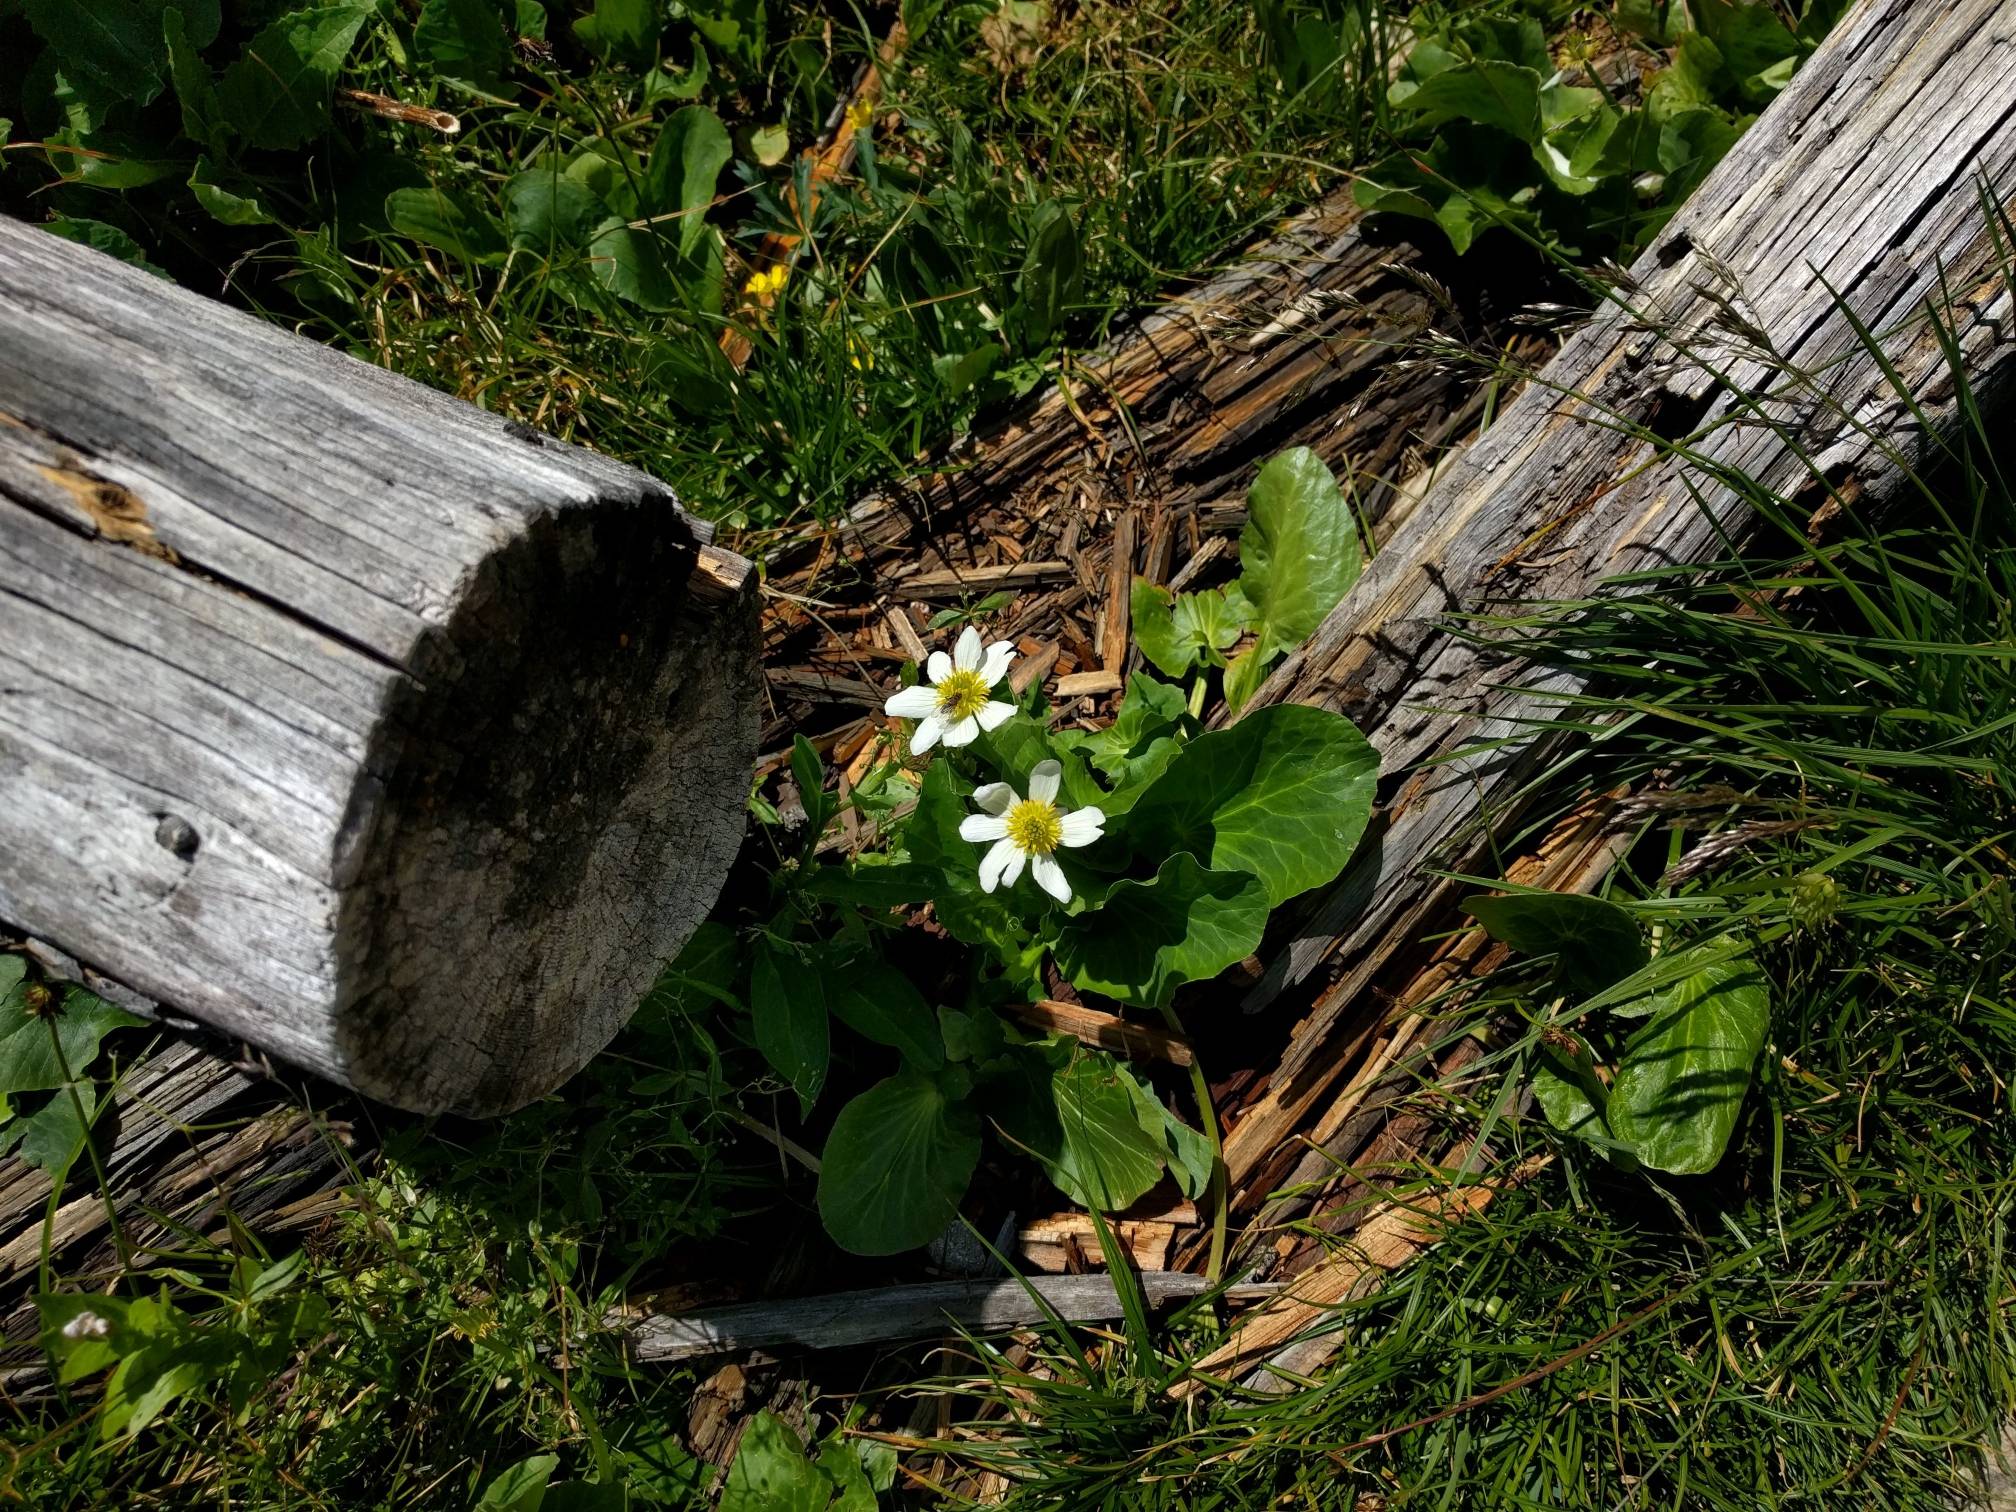 Image: A White Marsh Marigold by the Ute Trail